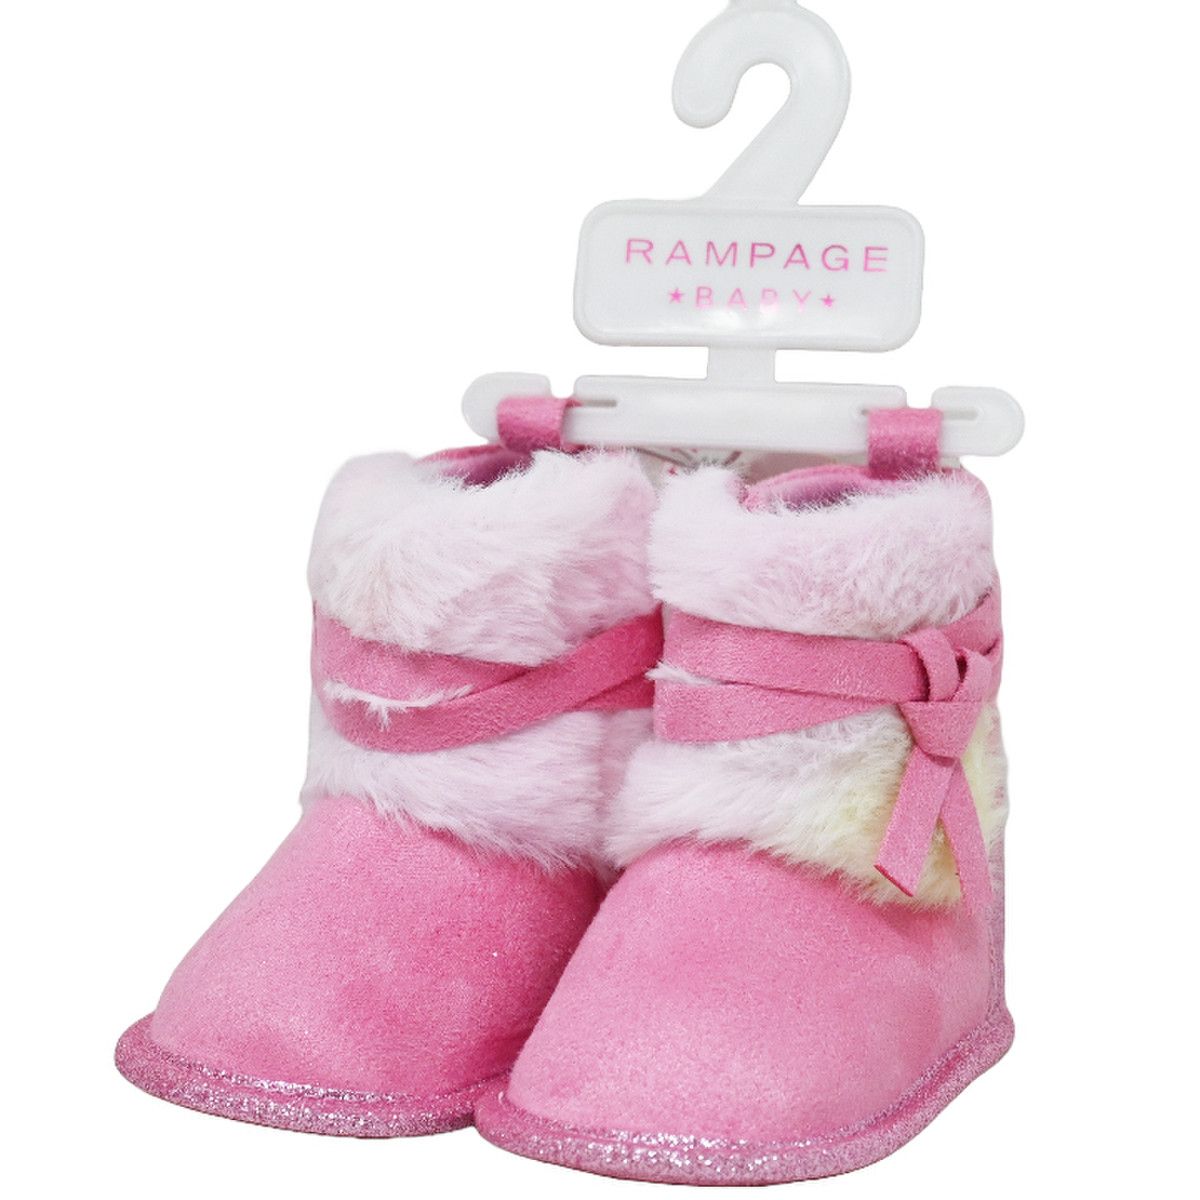 18 Wholesale Infant Girls Microsuede Boots W/ Faux Fur Bow